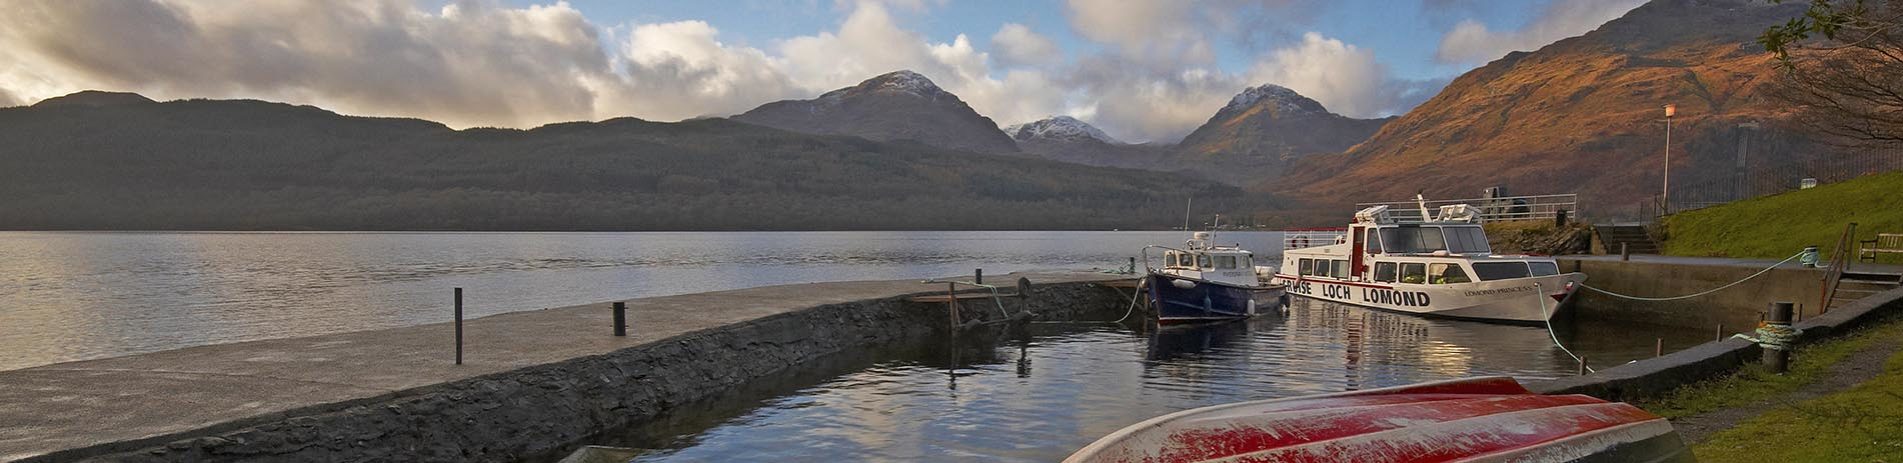 inversnaid-pier-with-two-moored-boats-and-upturned-red-boat-and-arrochar-alps-summits-in-the-distance-over-loch-lomond